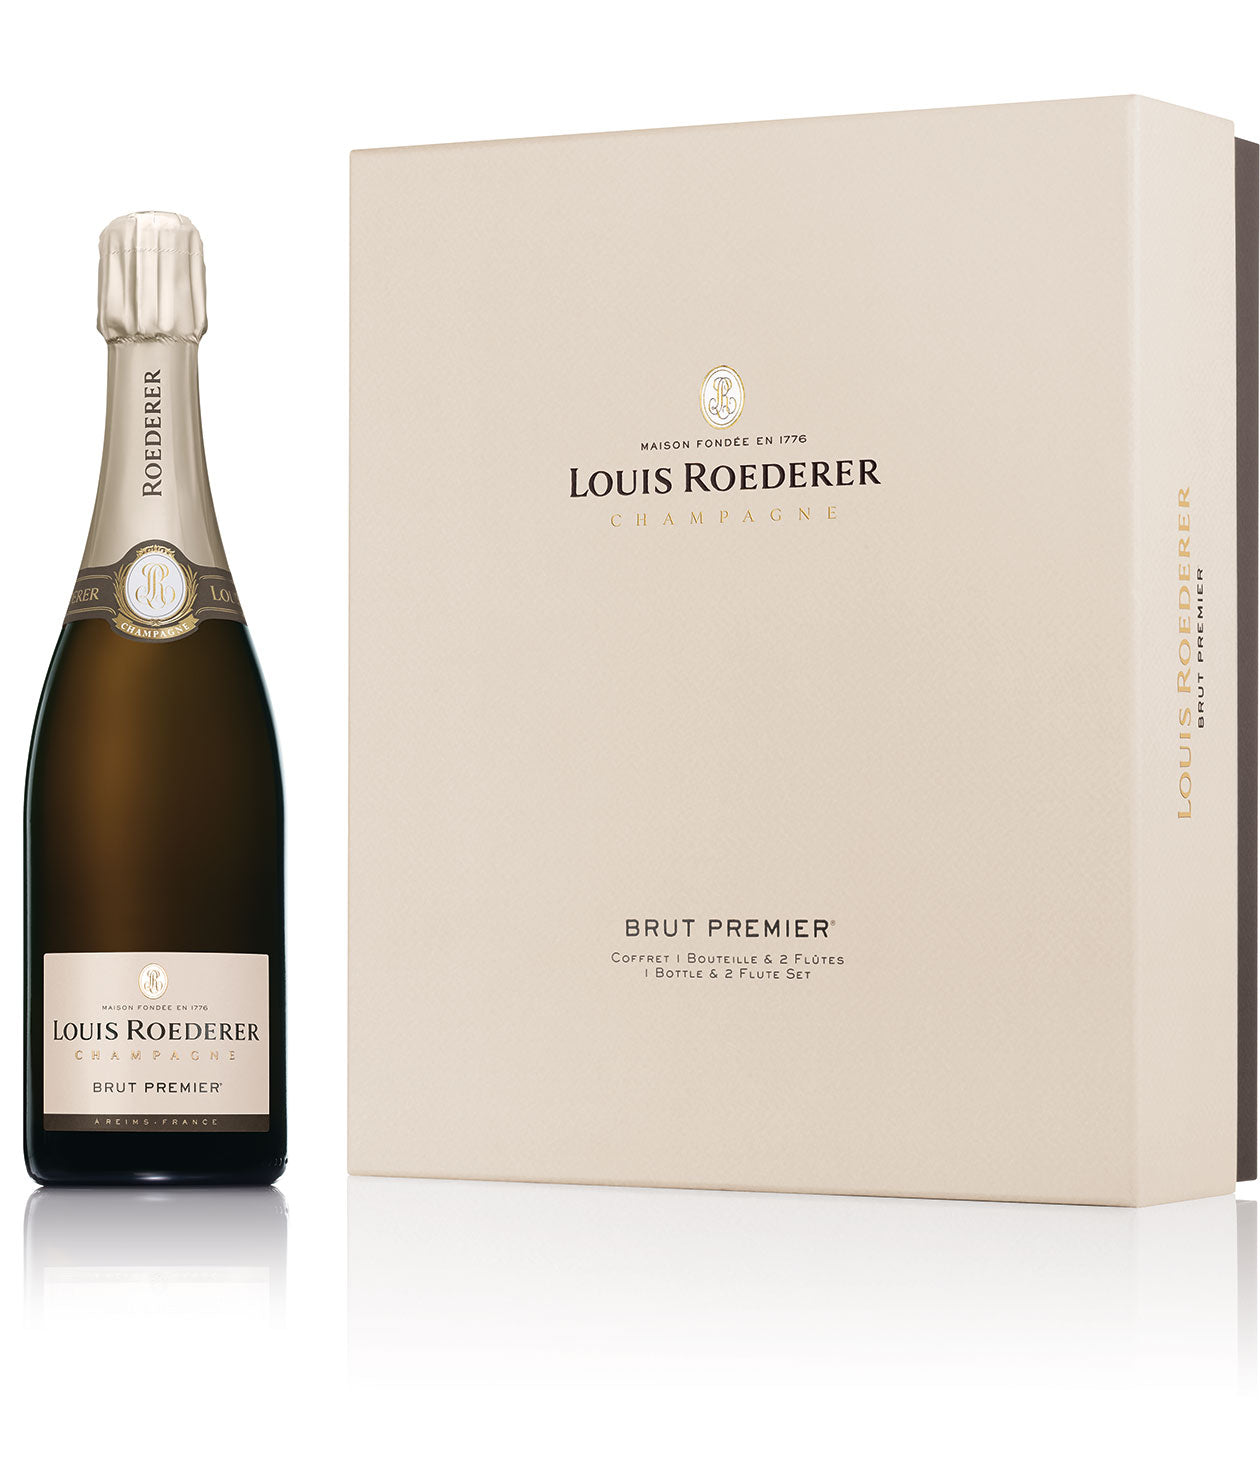 The Louis Roederer Collection